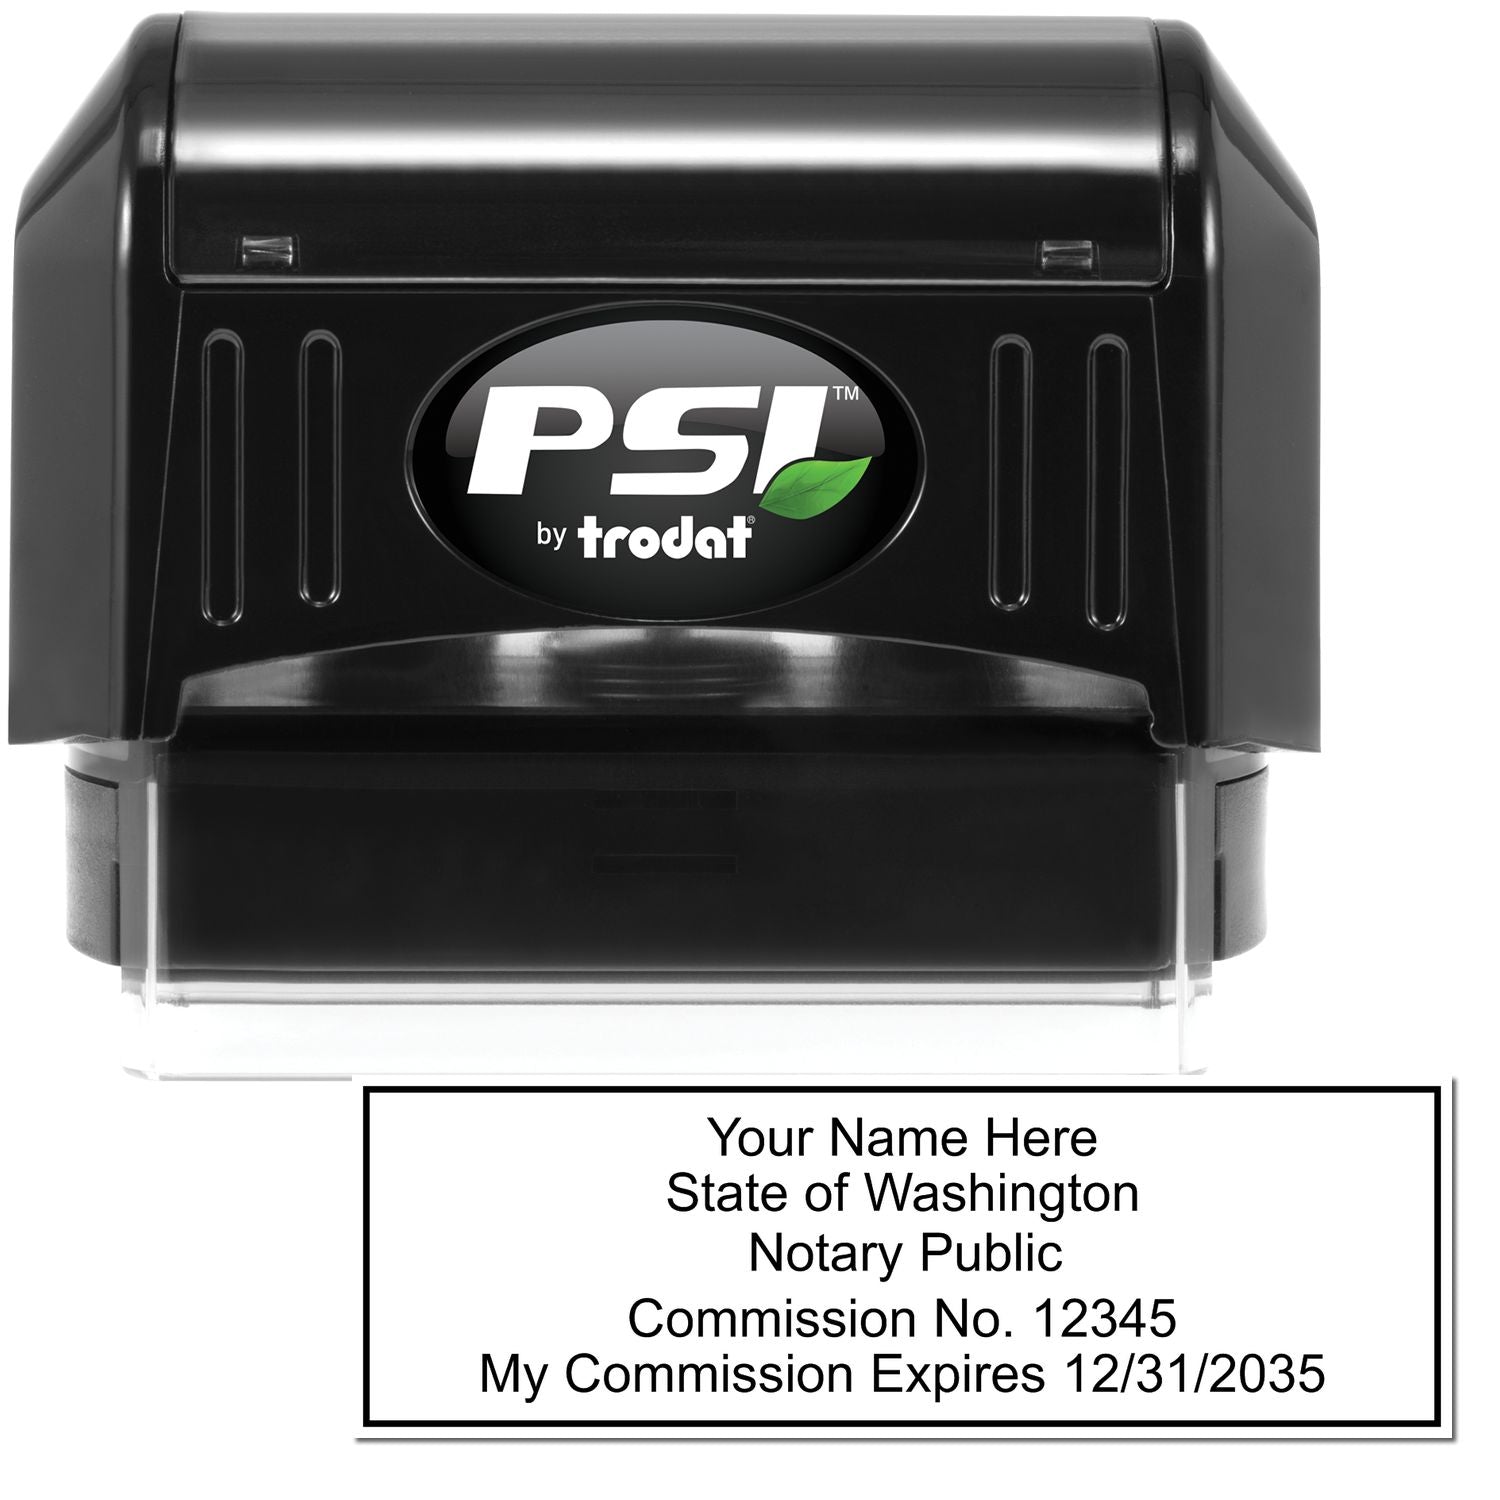 The main image for the PSI Washington Notary Stamp depicting a sample of the imprint and electronic files